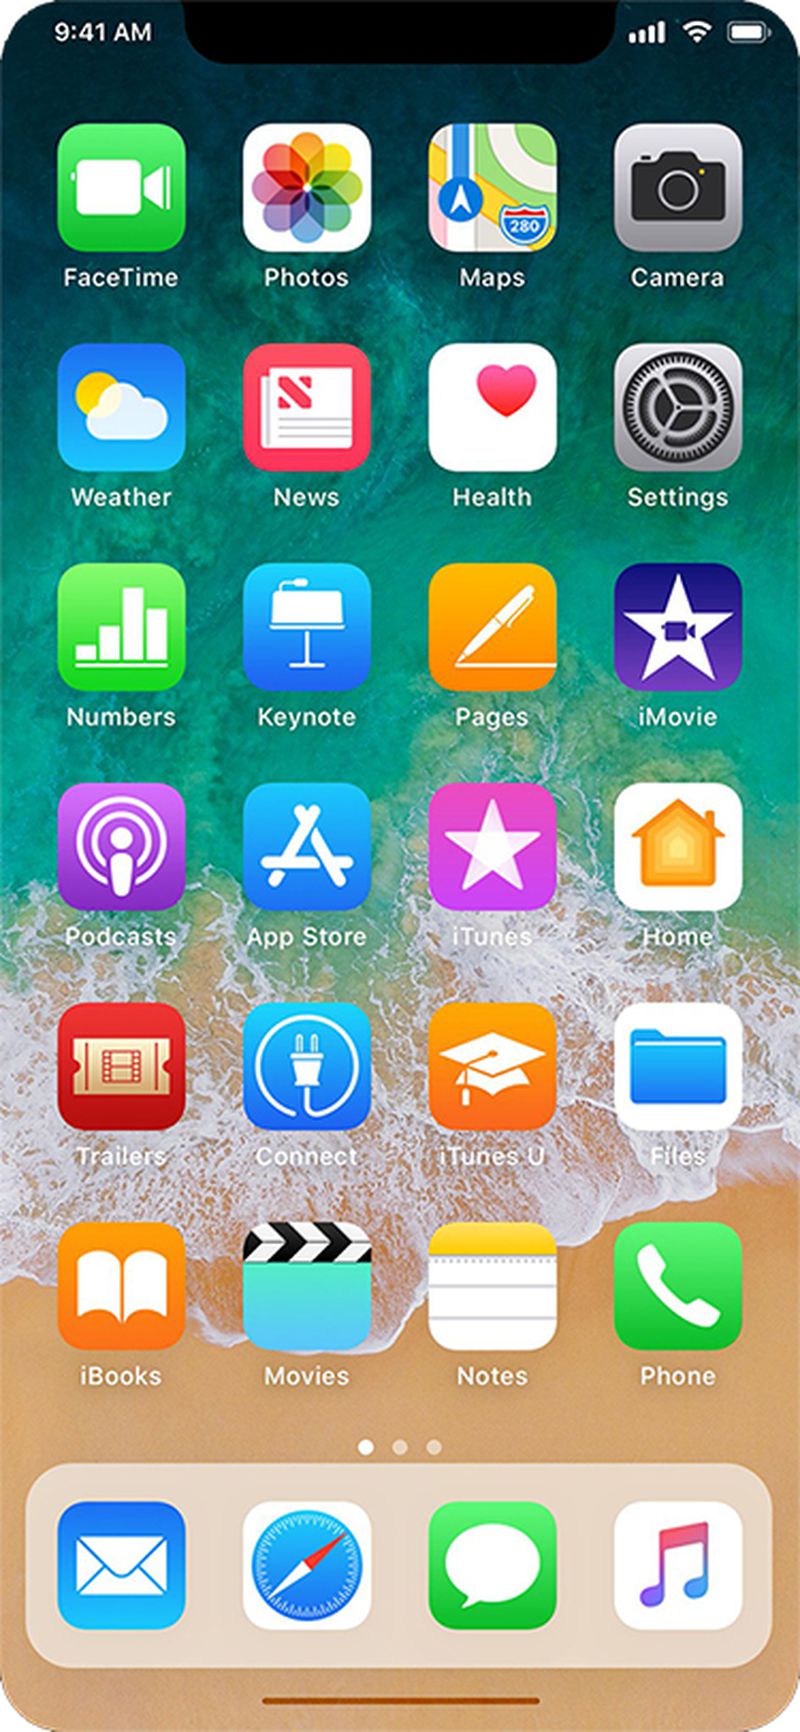 Here's What the Status Bar and iPad-Style Dock Could Look Like on ...